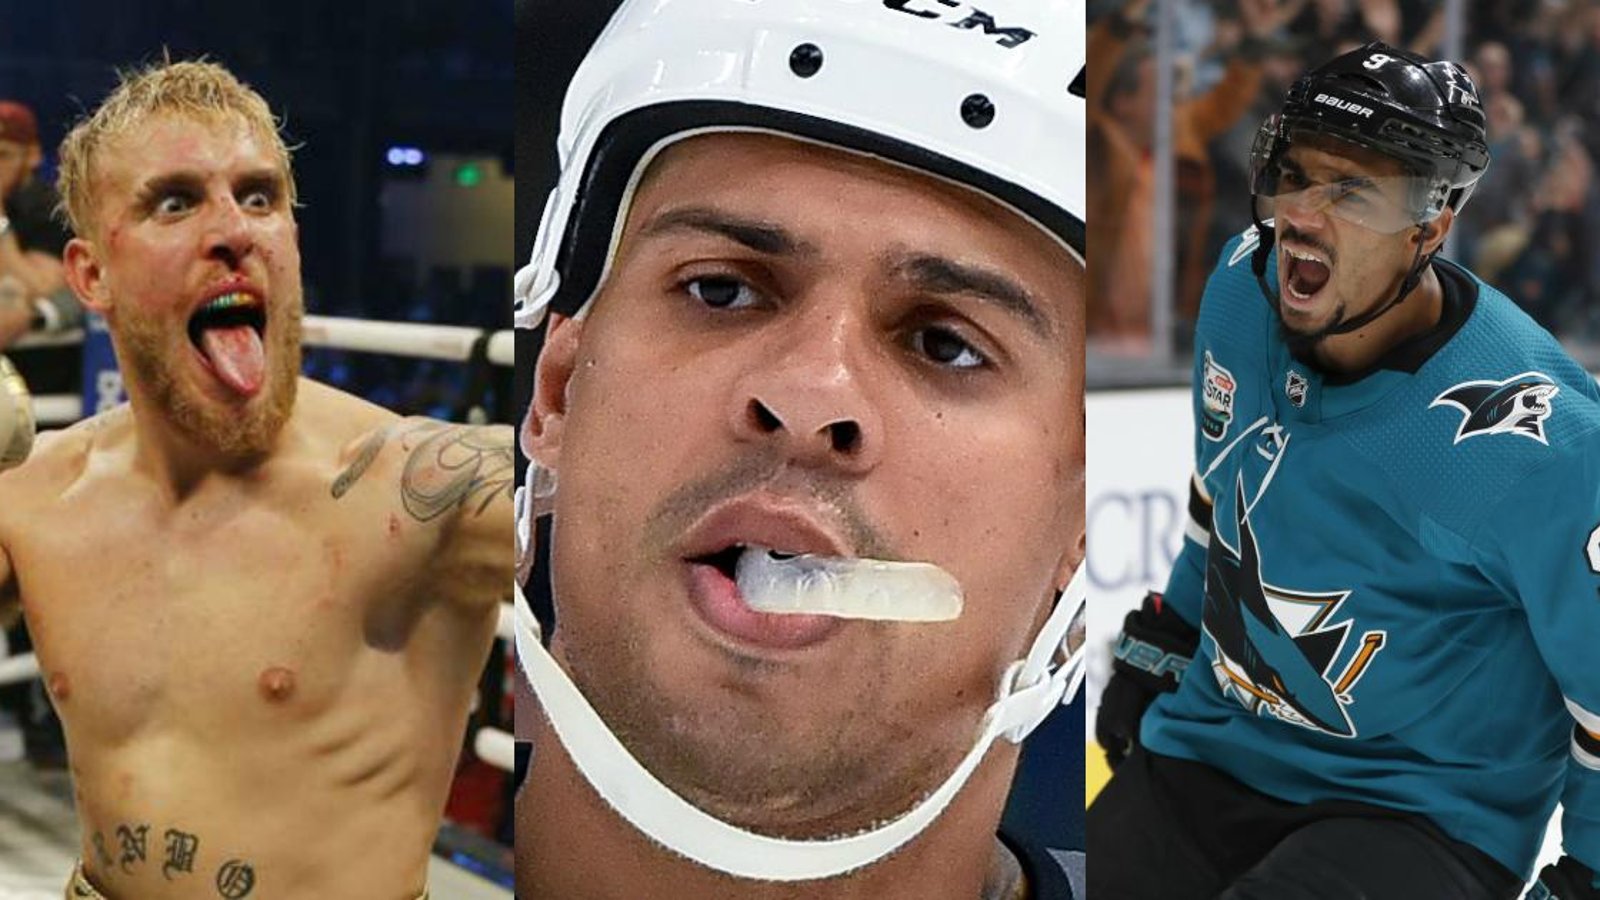 NHL playoffs 2019: Evander Kane says fighting Ryan Reaves is like trading  blows with the 'Muffin Man